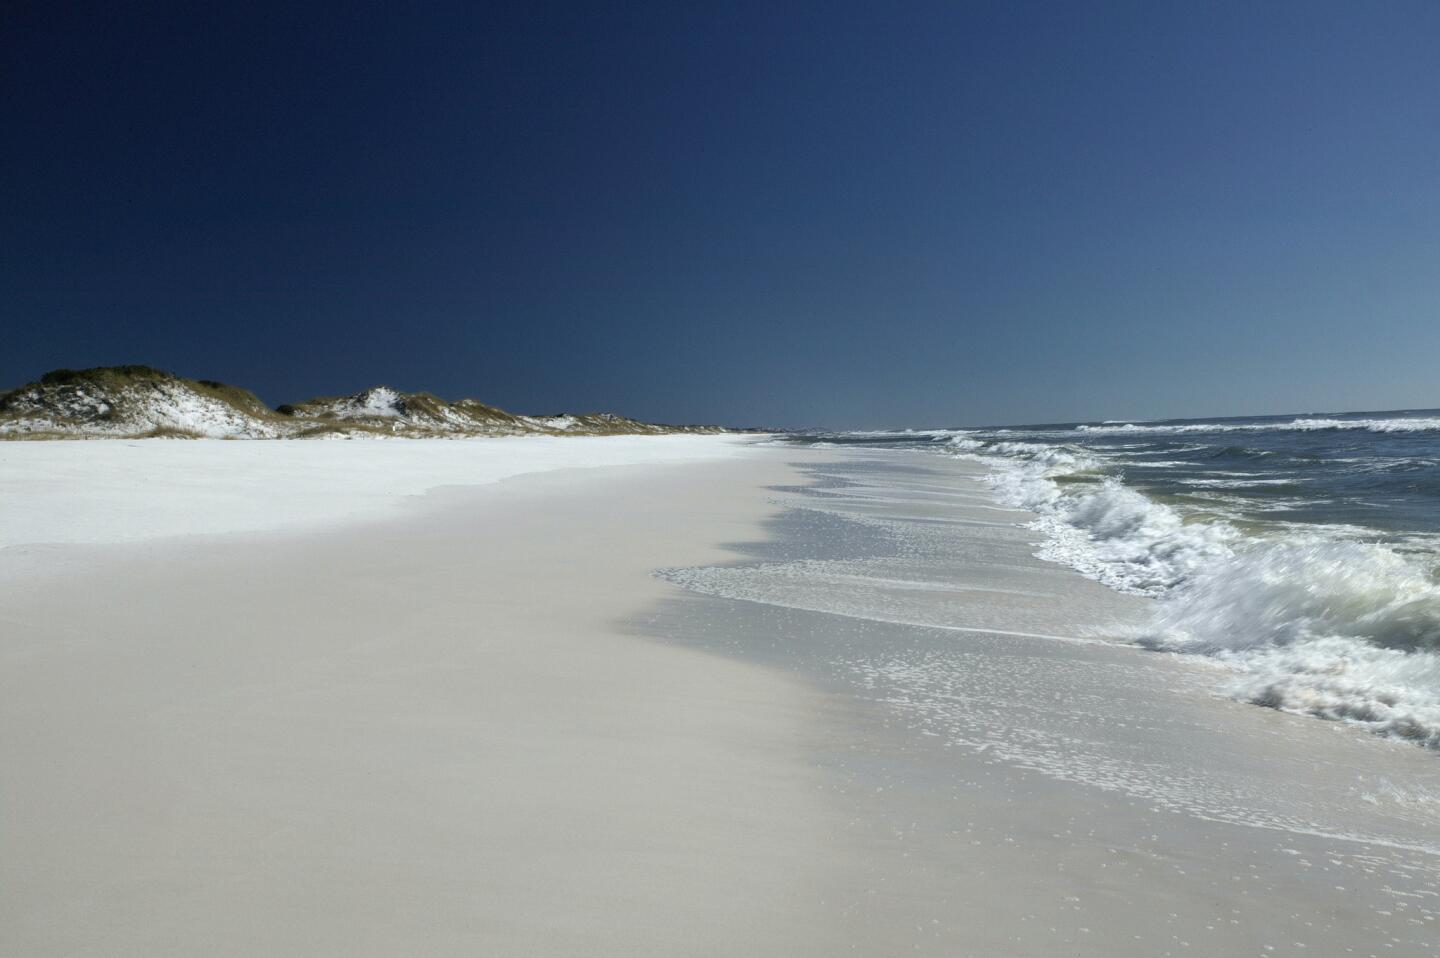 This undated photo provided by Visit South Walton shows Grayton Beach on Florida's Panhandle on the Gulf Coast. Grayton Beach State Park is No. 3 on the list of top beaches for the summer of 2018 as compiled by Stephen Leatherman, also known as Dr. Beach, a professor at Florida International University. The beach was named No. 1 in the U.S. in Dr. Beach's 1994 best beach list.